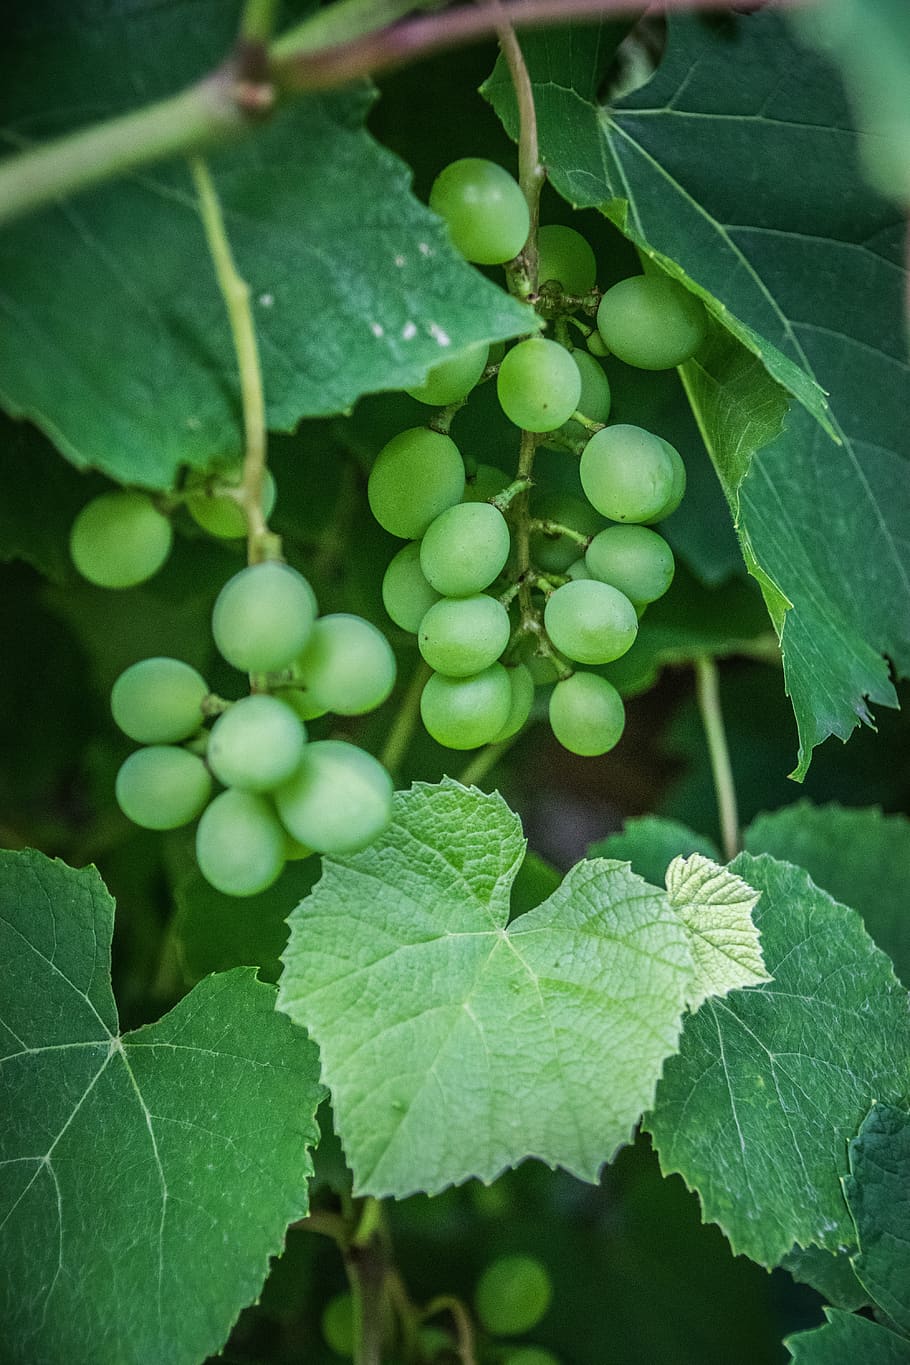 grape, wine, the grapes, grapevine, viticulture, vineyard, green, berry, leaf, plant part